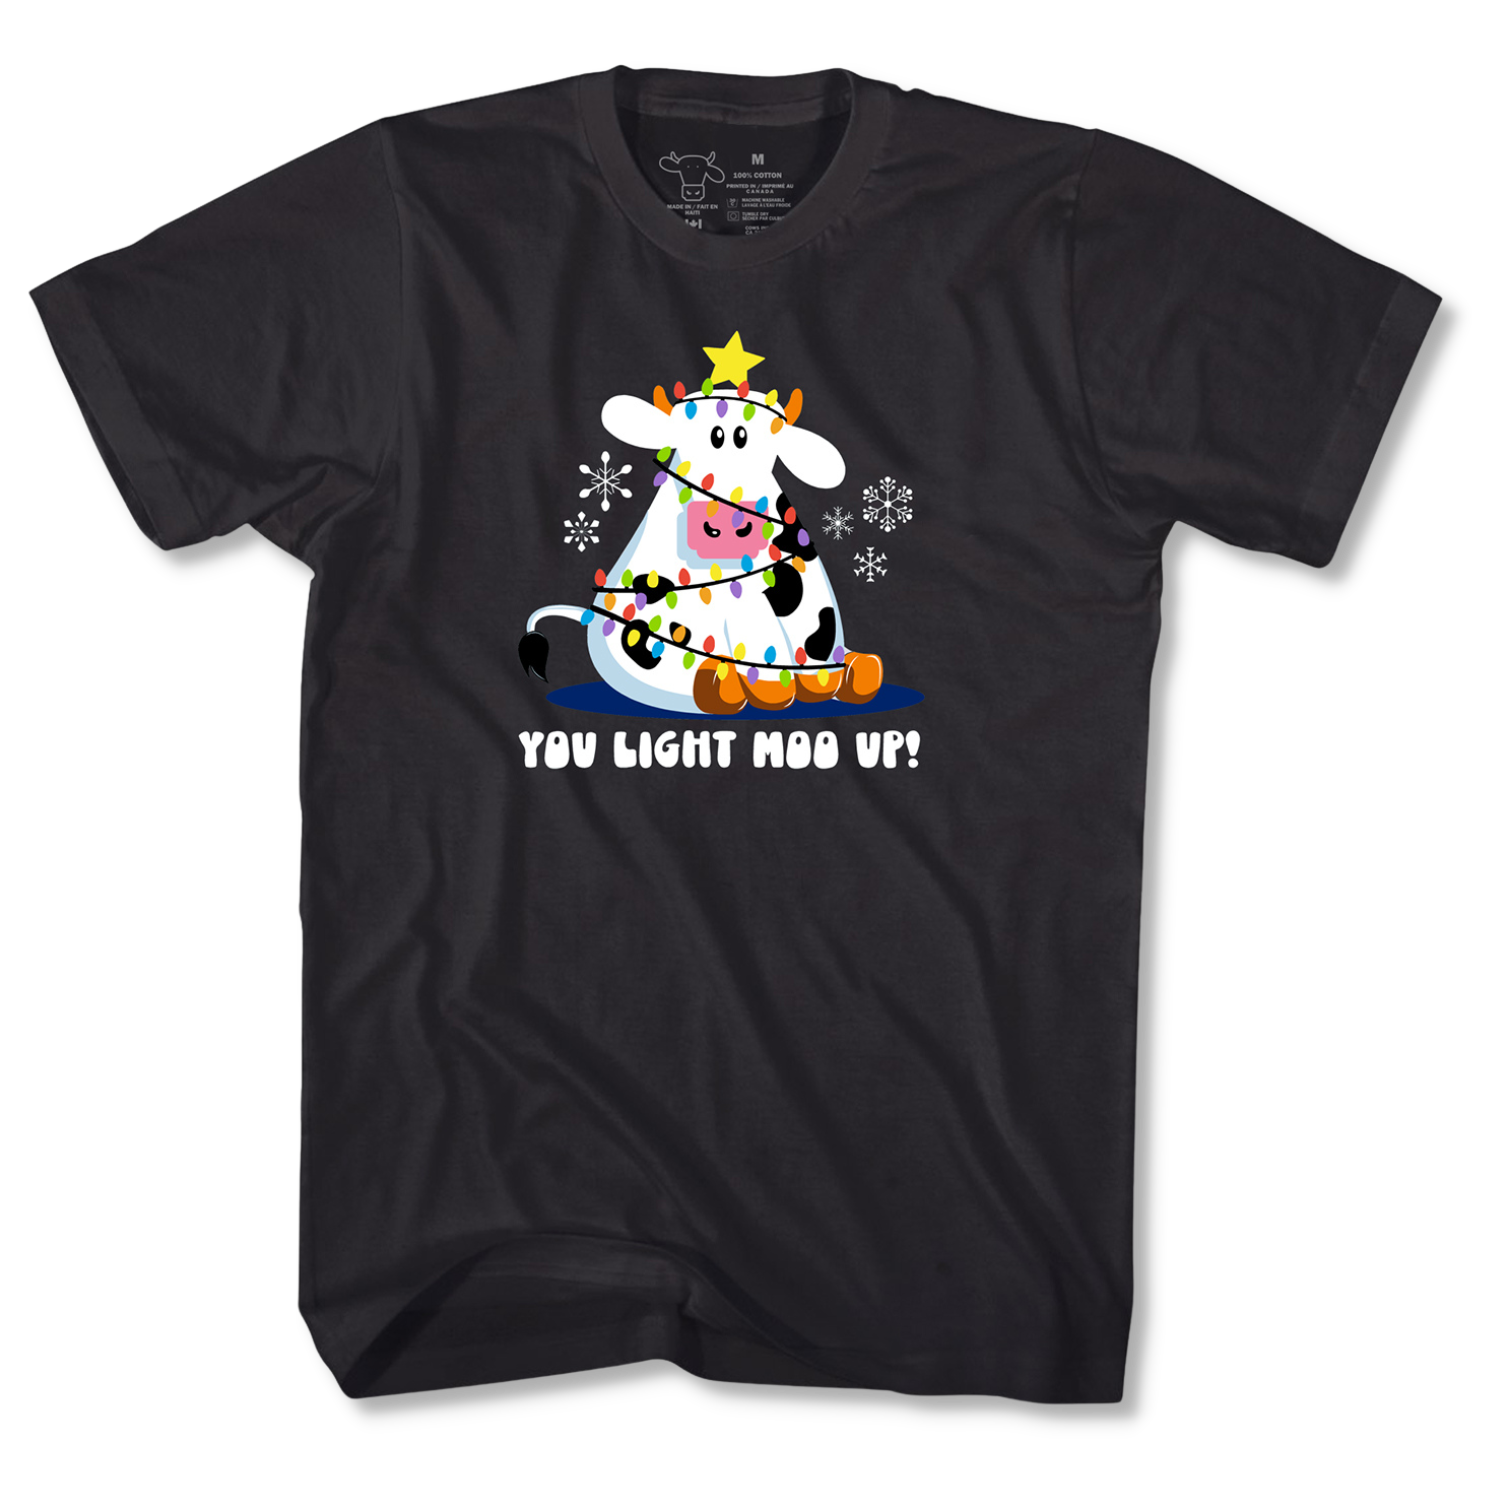 You Light MOO Up Adult/Youth/Kids T